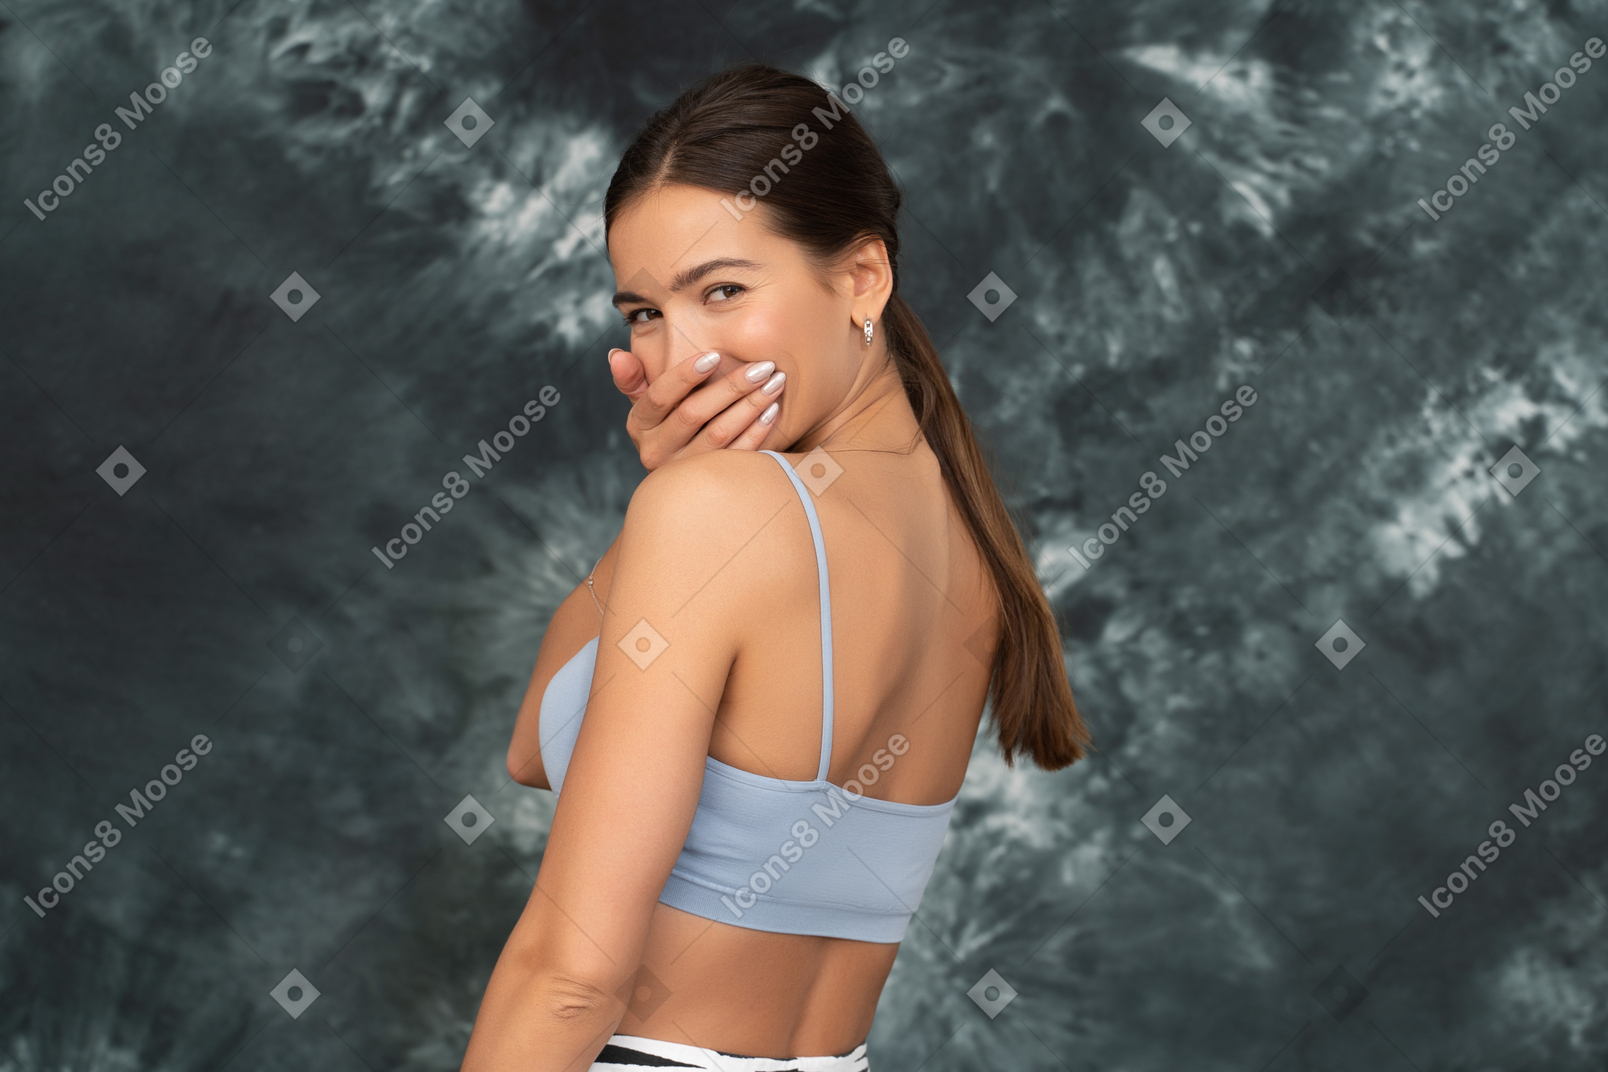 A portrait of laughing female athlete turned back